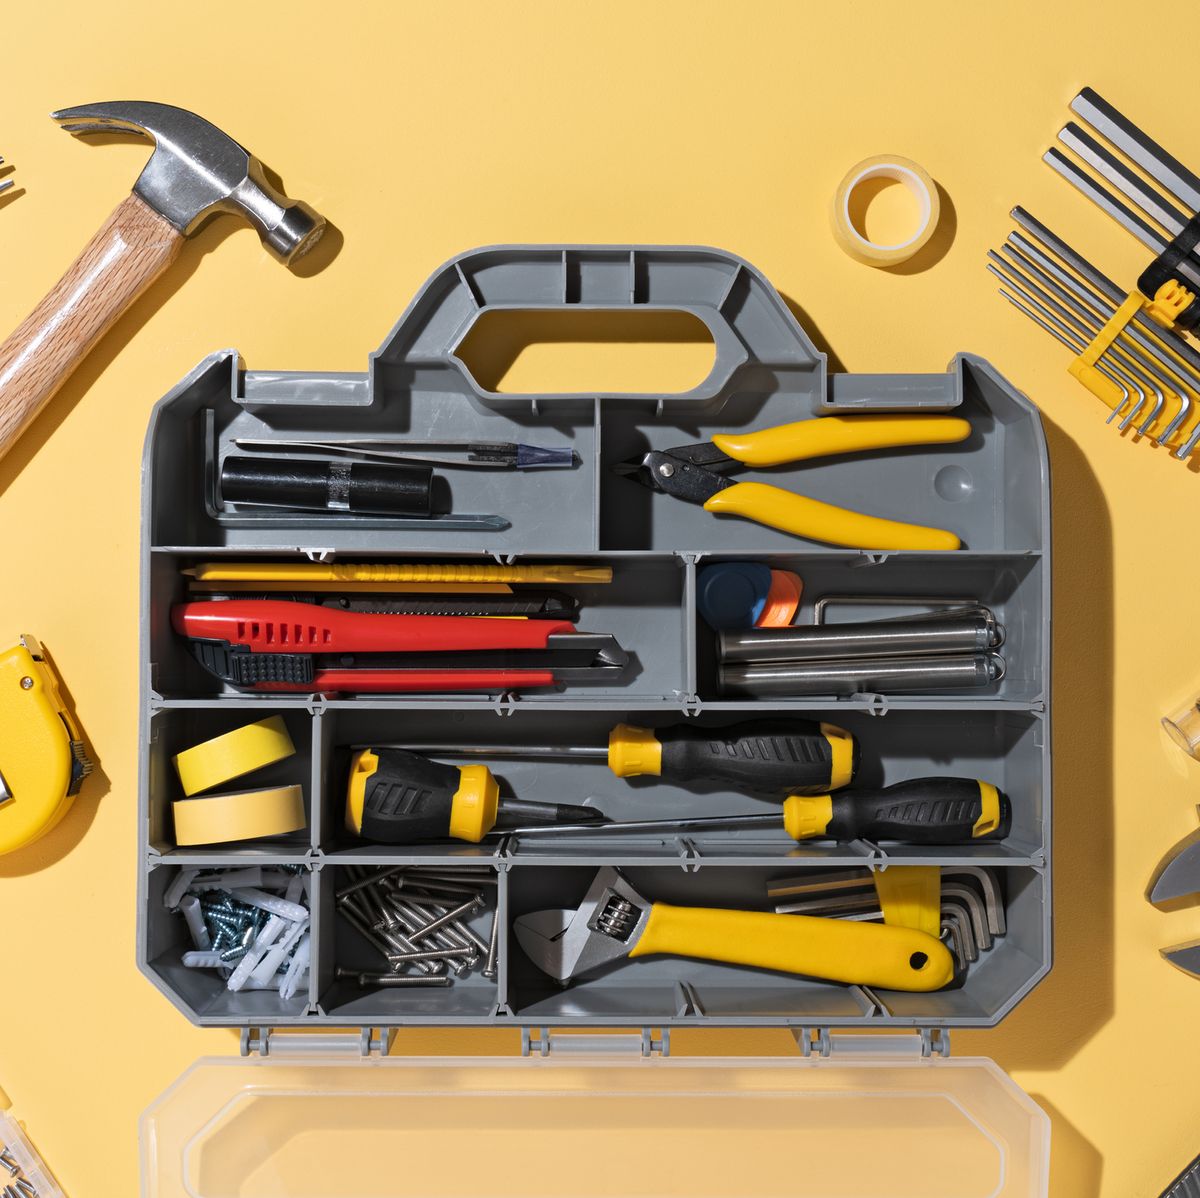 15 tools you need to have in your toolbox - The Washington Post